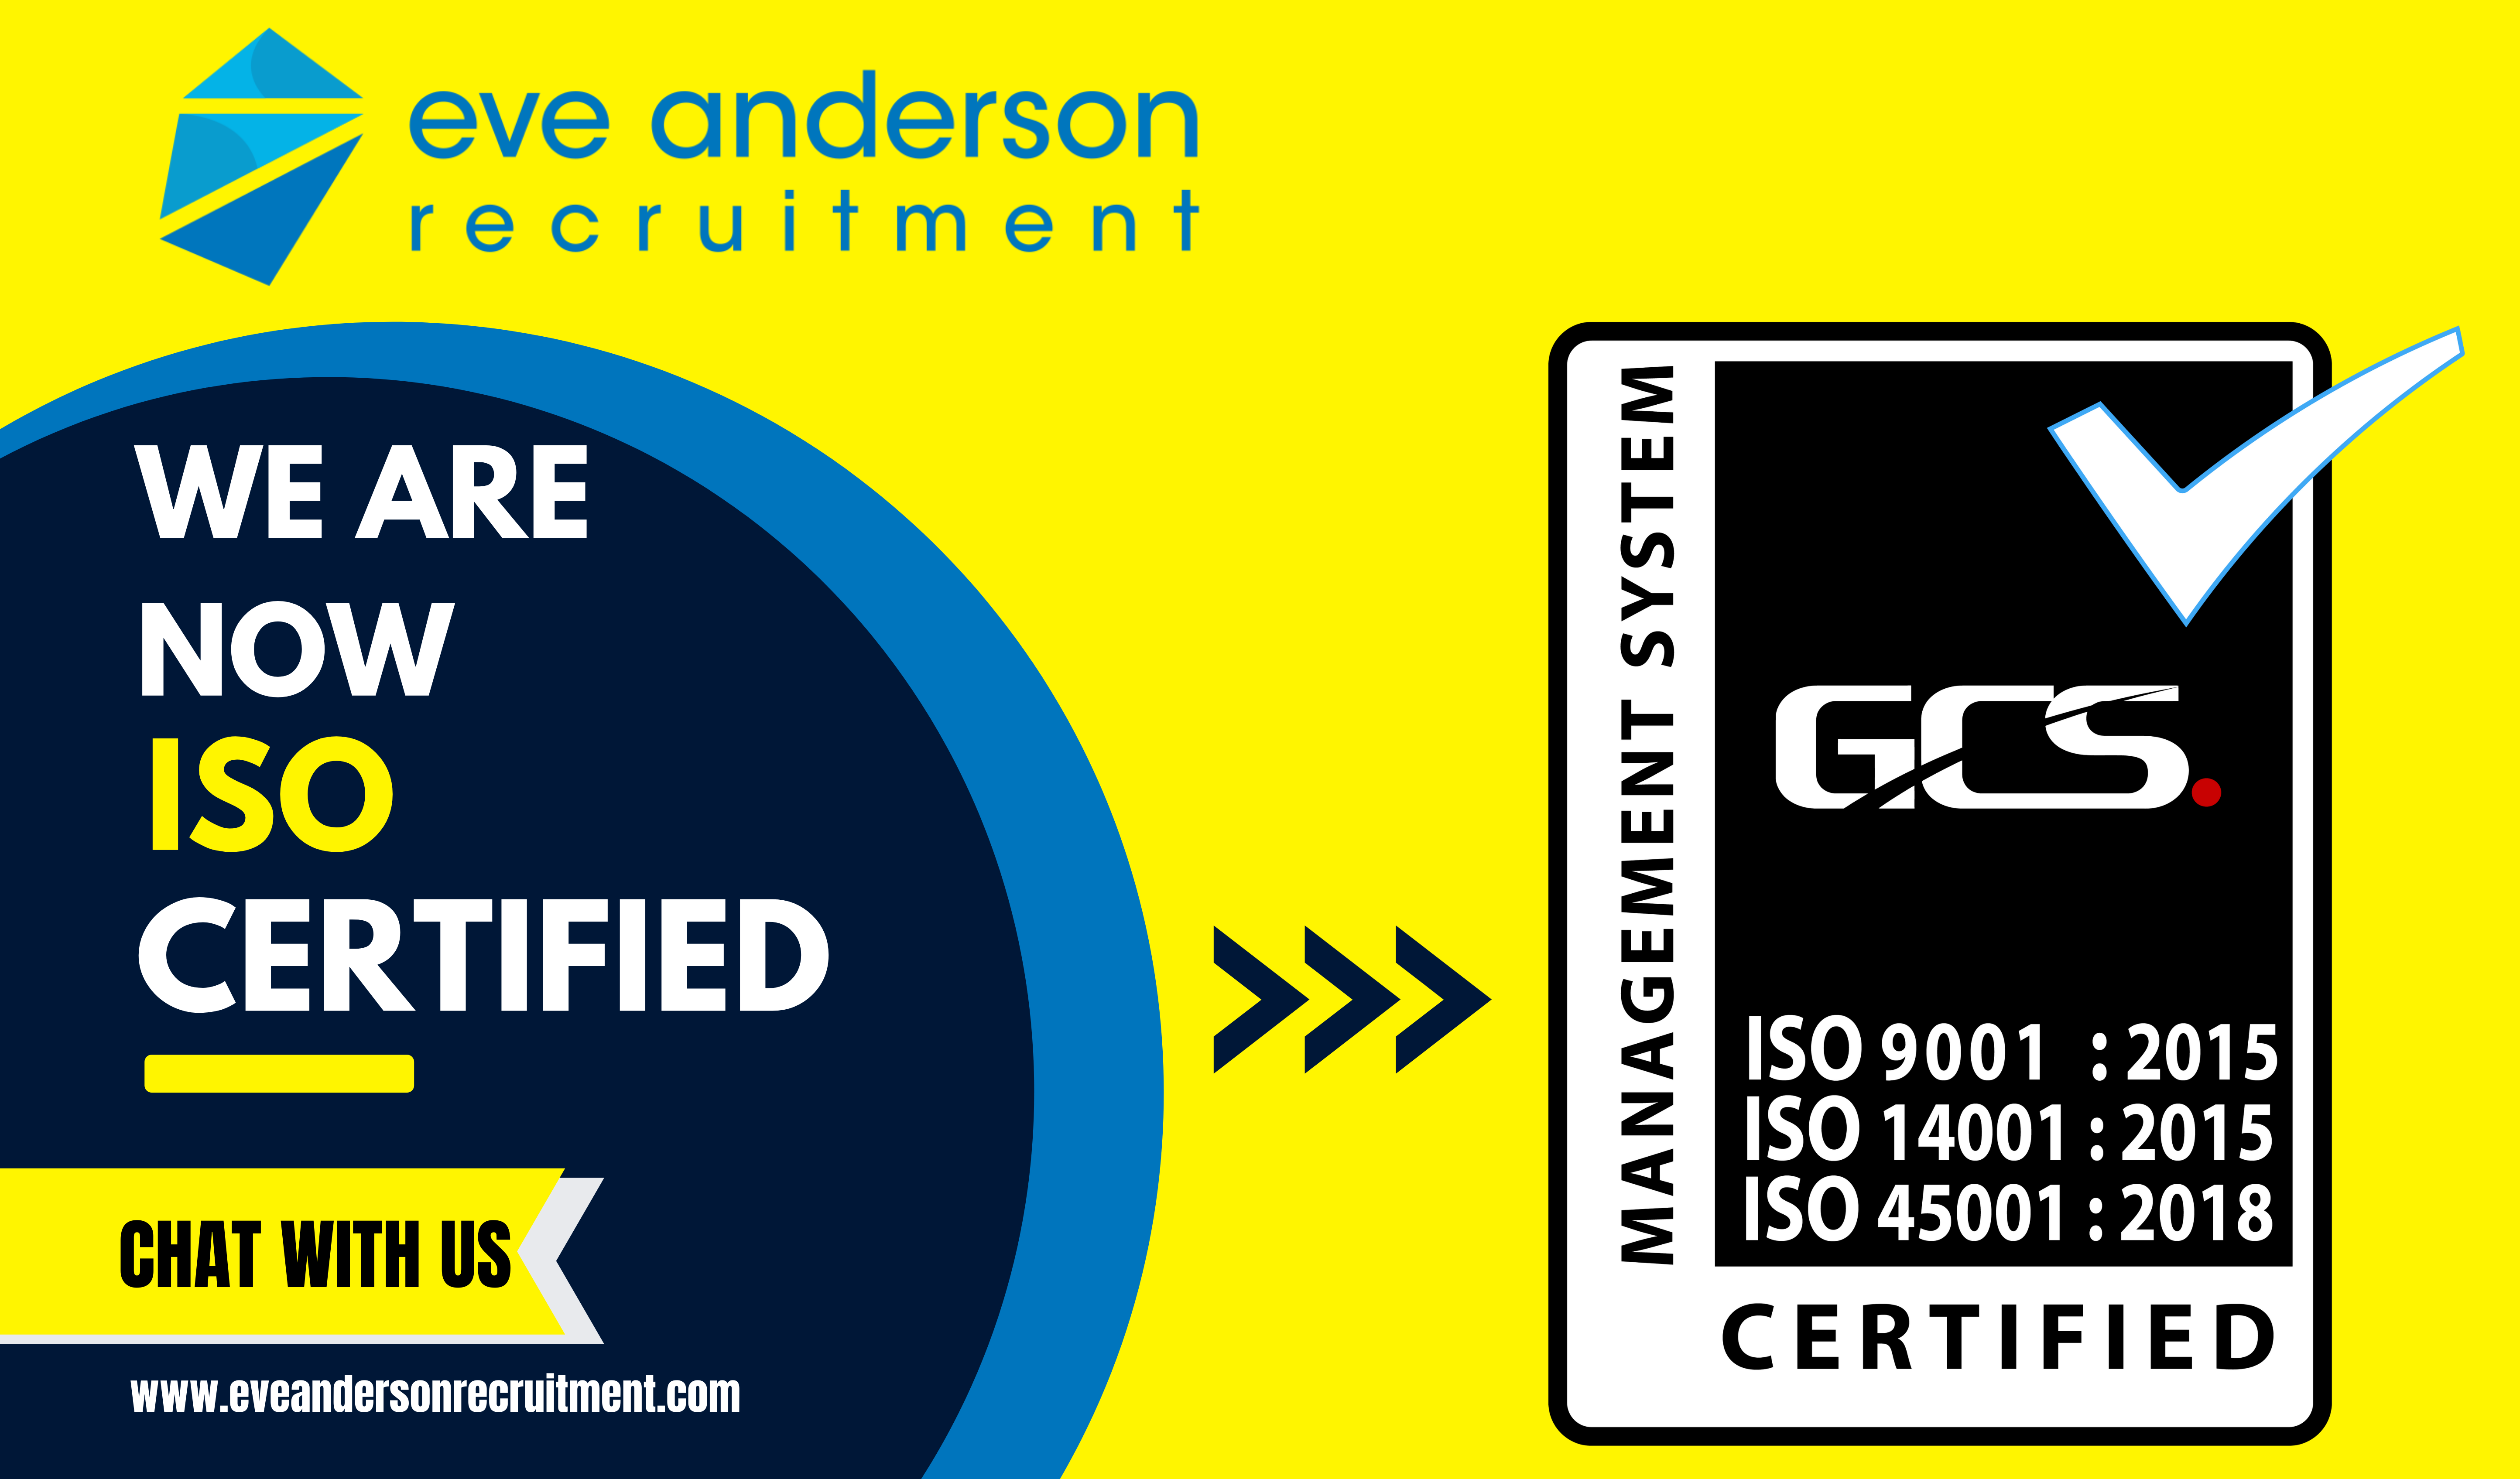 Eve Anderson Recruitment now ISO certified